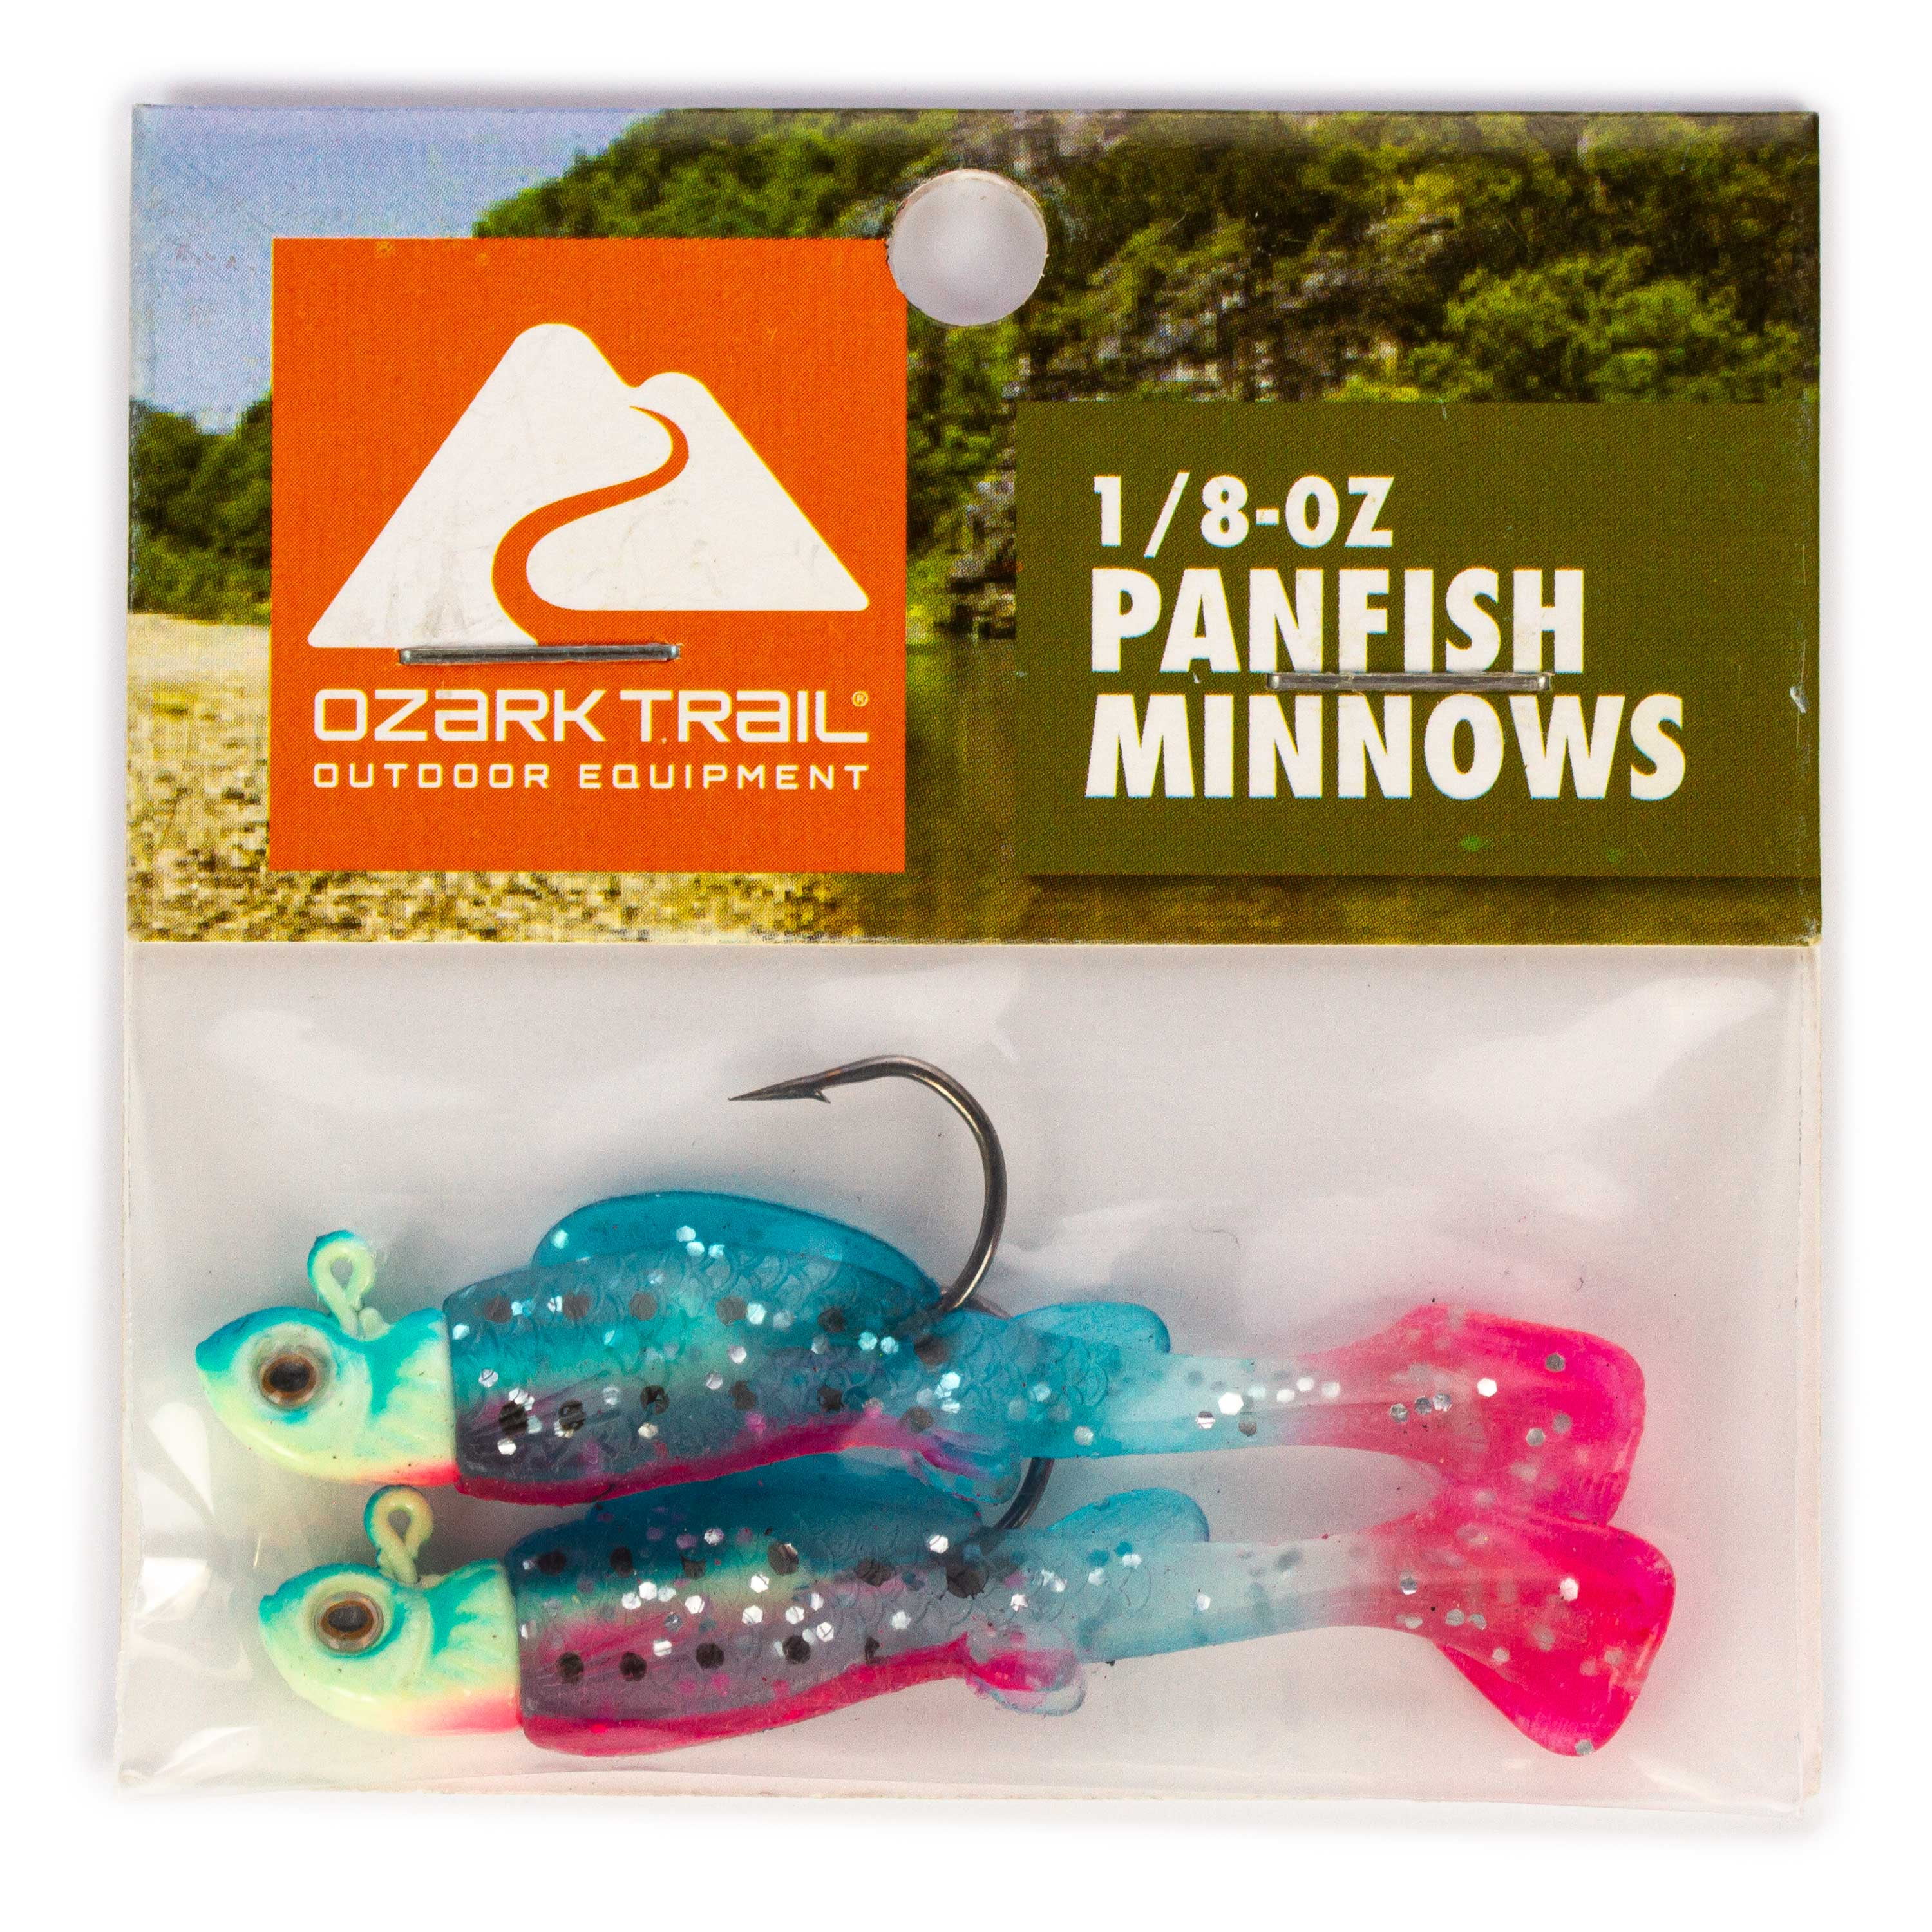 Ozark Trail 1/32 Ounce Blue/Pink Rigged Panfish Minnow Fishing Lure, 2 Pack  